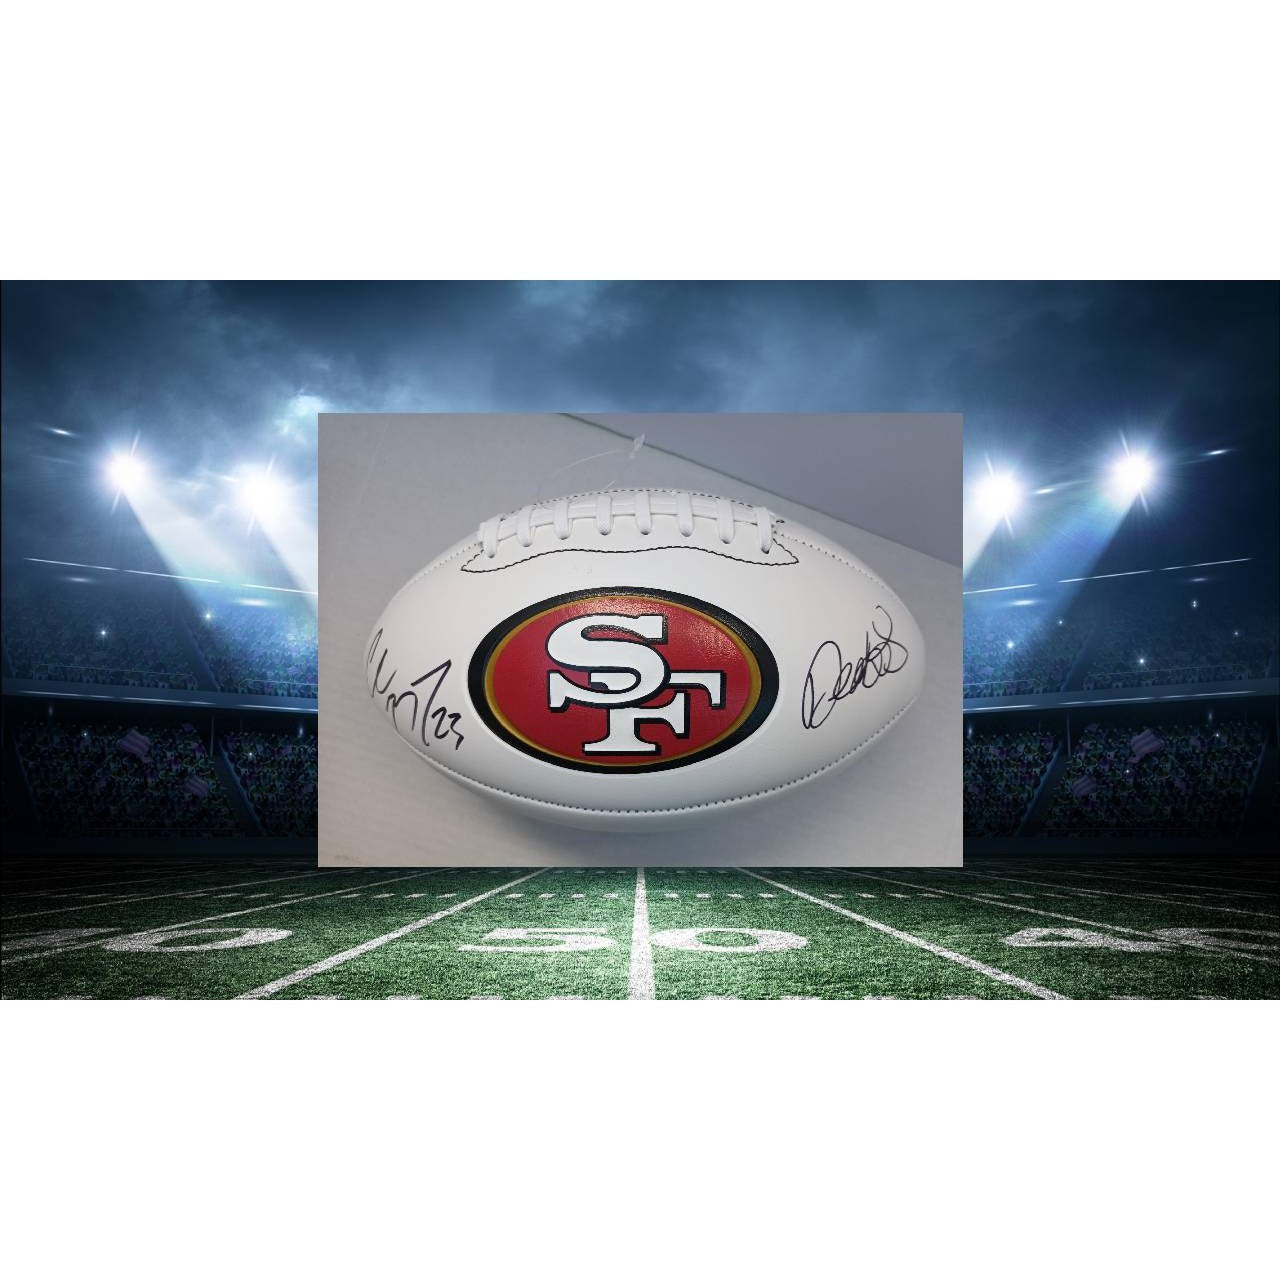 San Francisco 49ers Christian McCaffrey and Deebo Samuel full size football signed with proof